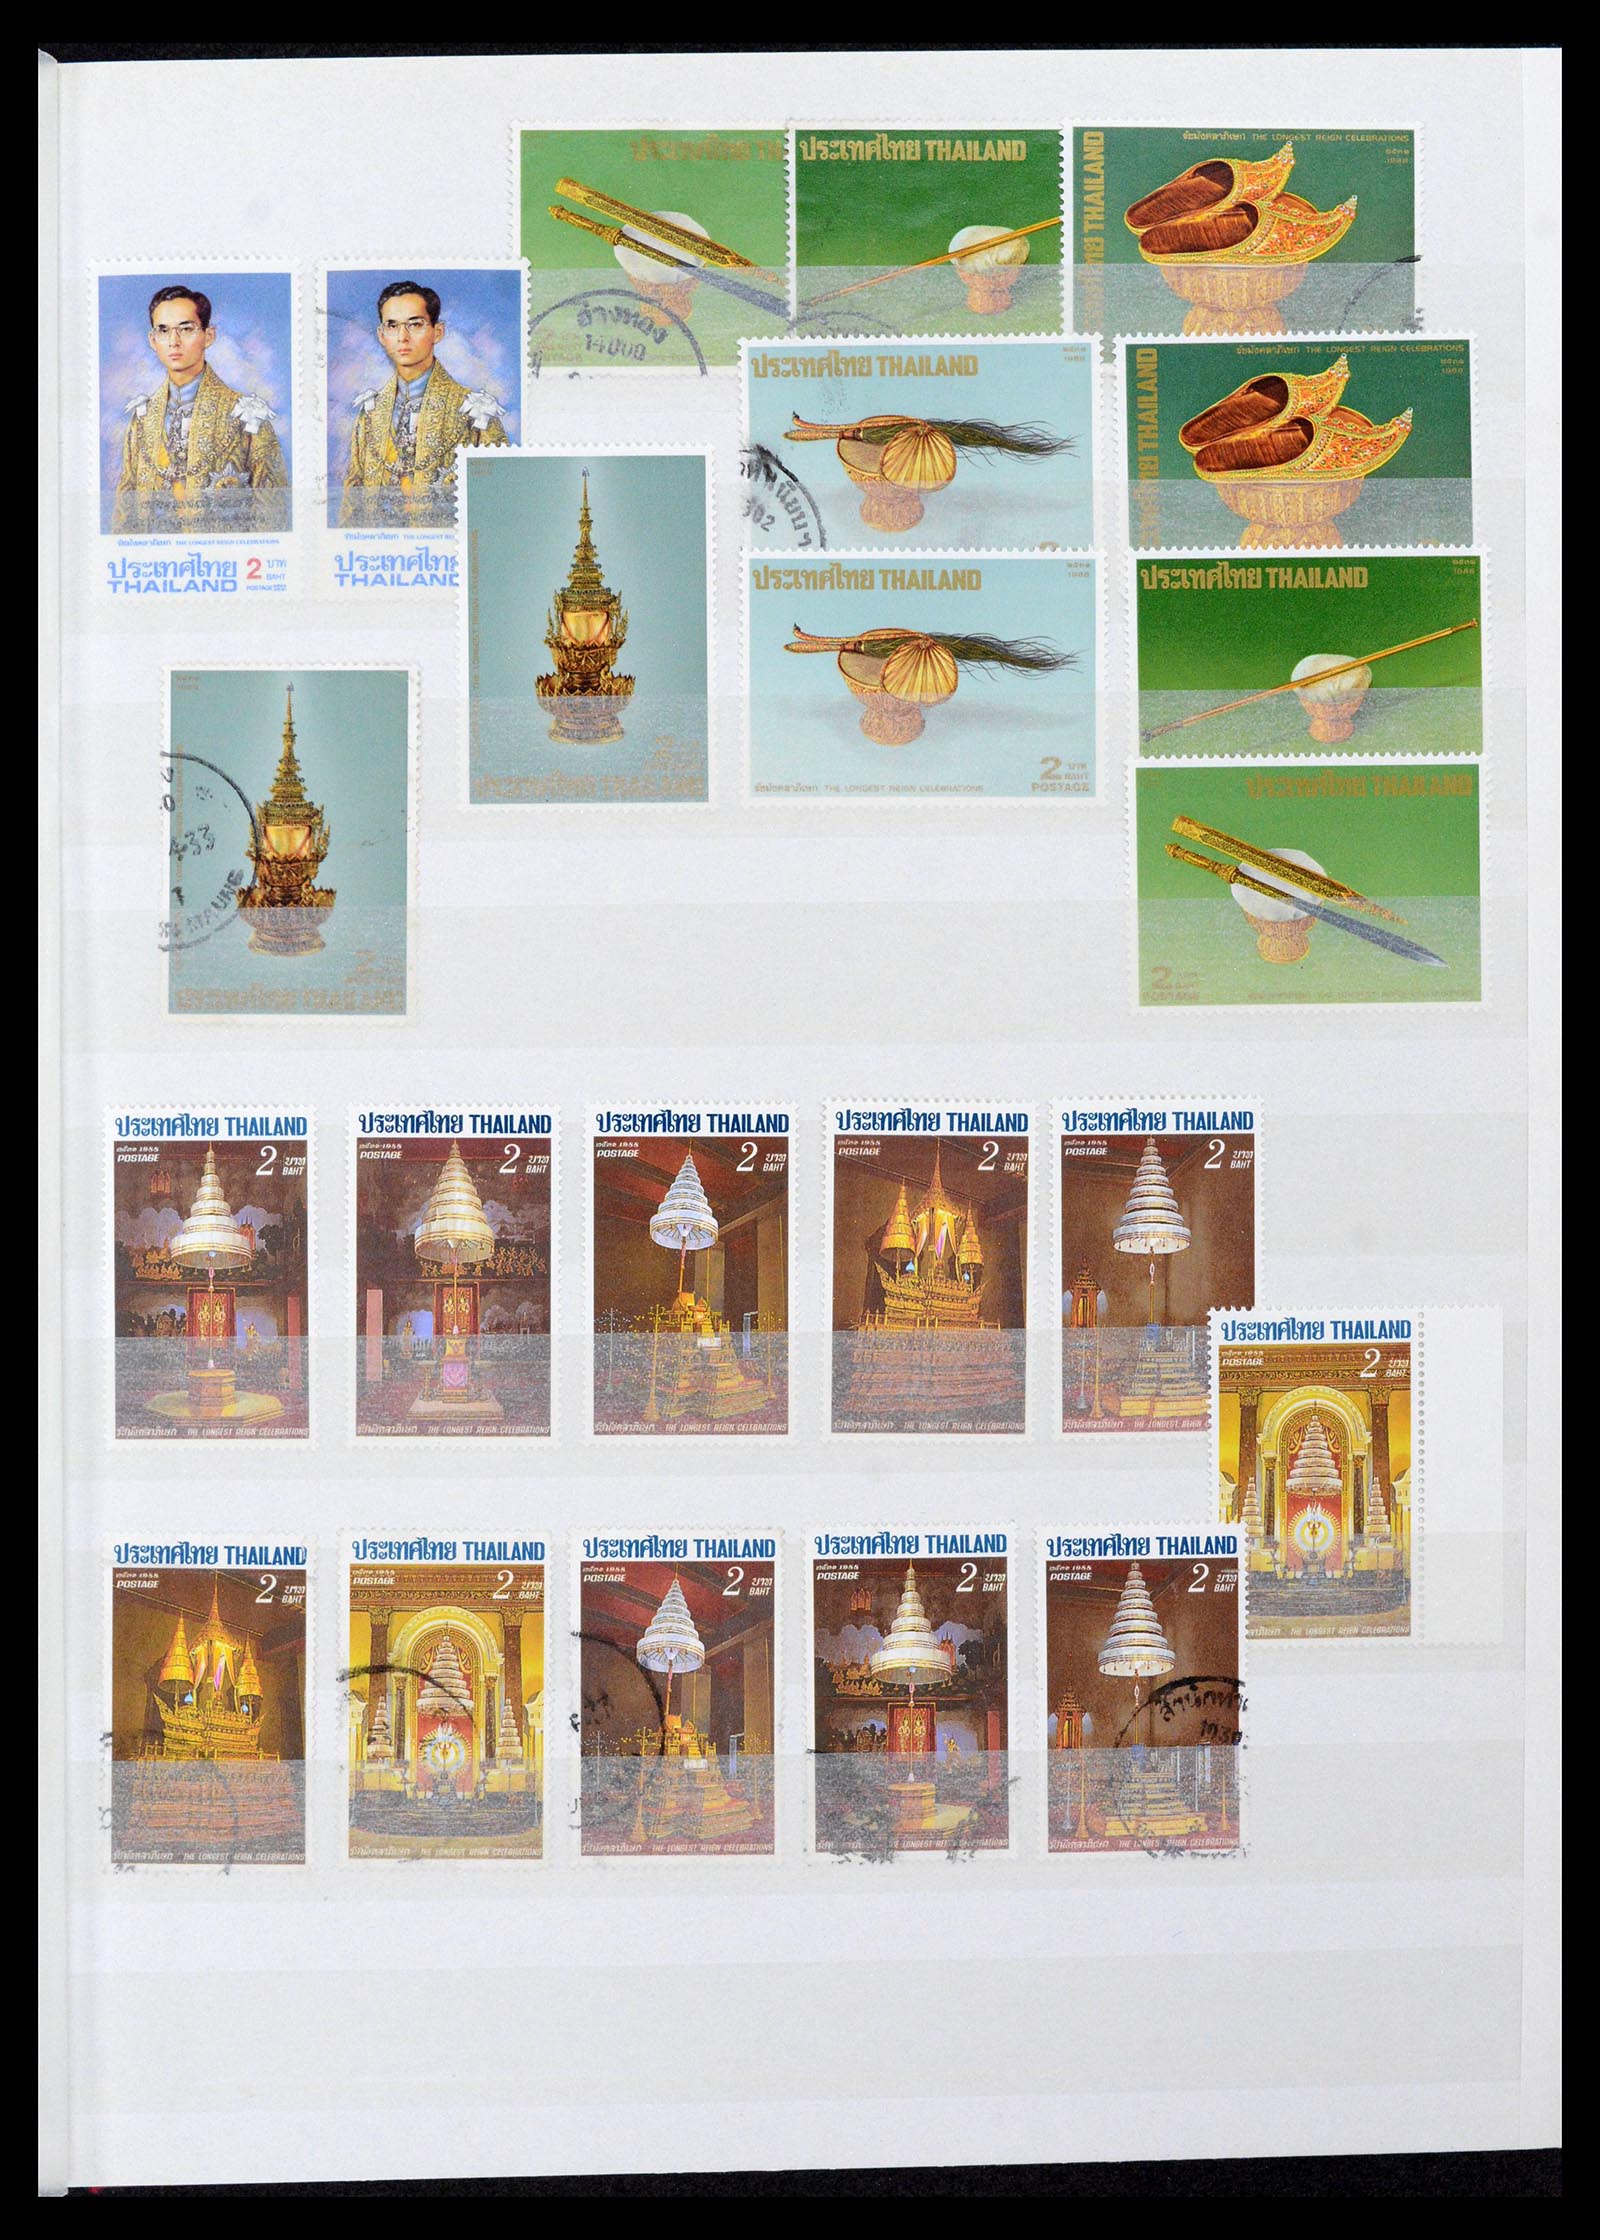 39384 0059 - Stamp collection 39384 Thailand 1883-2014.